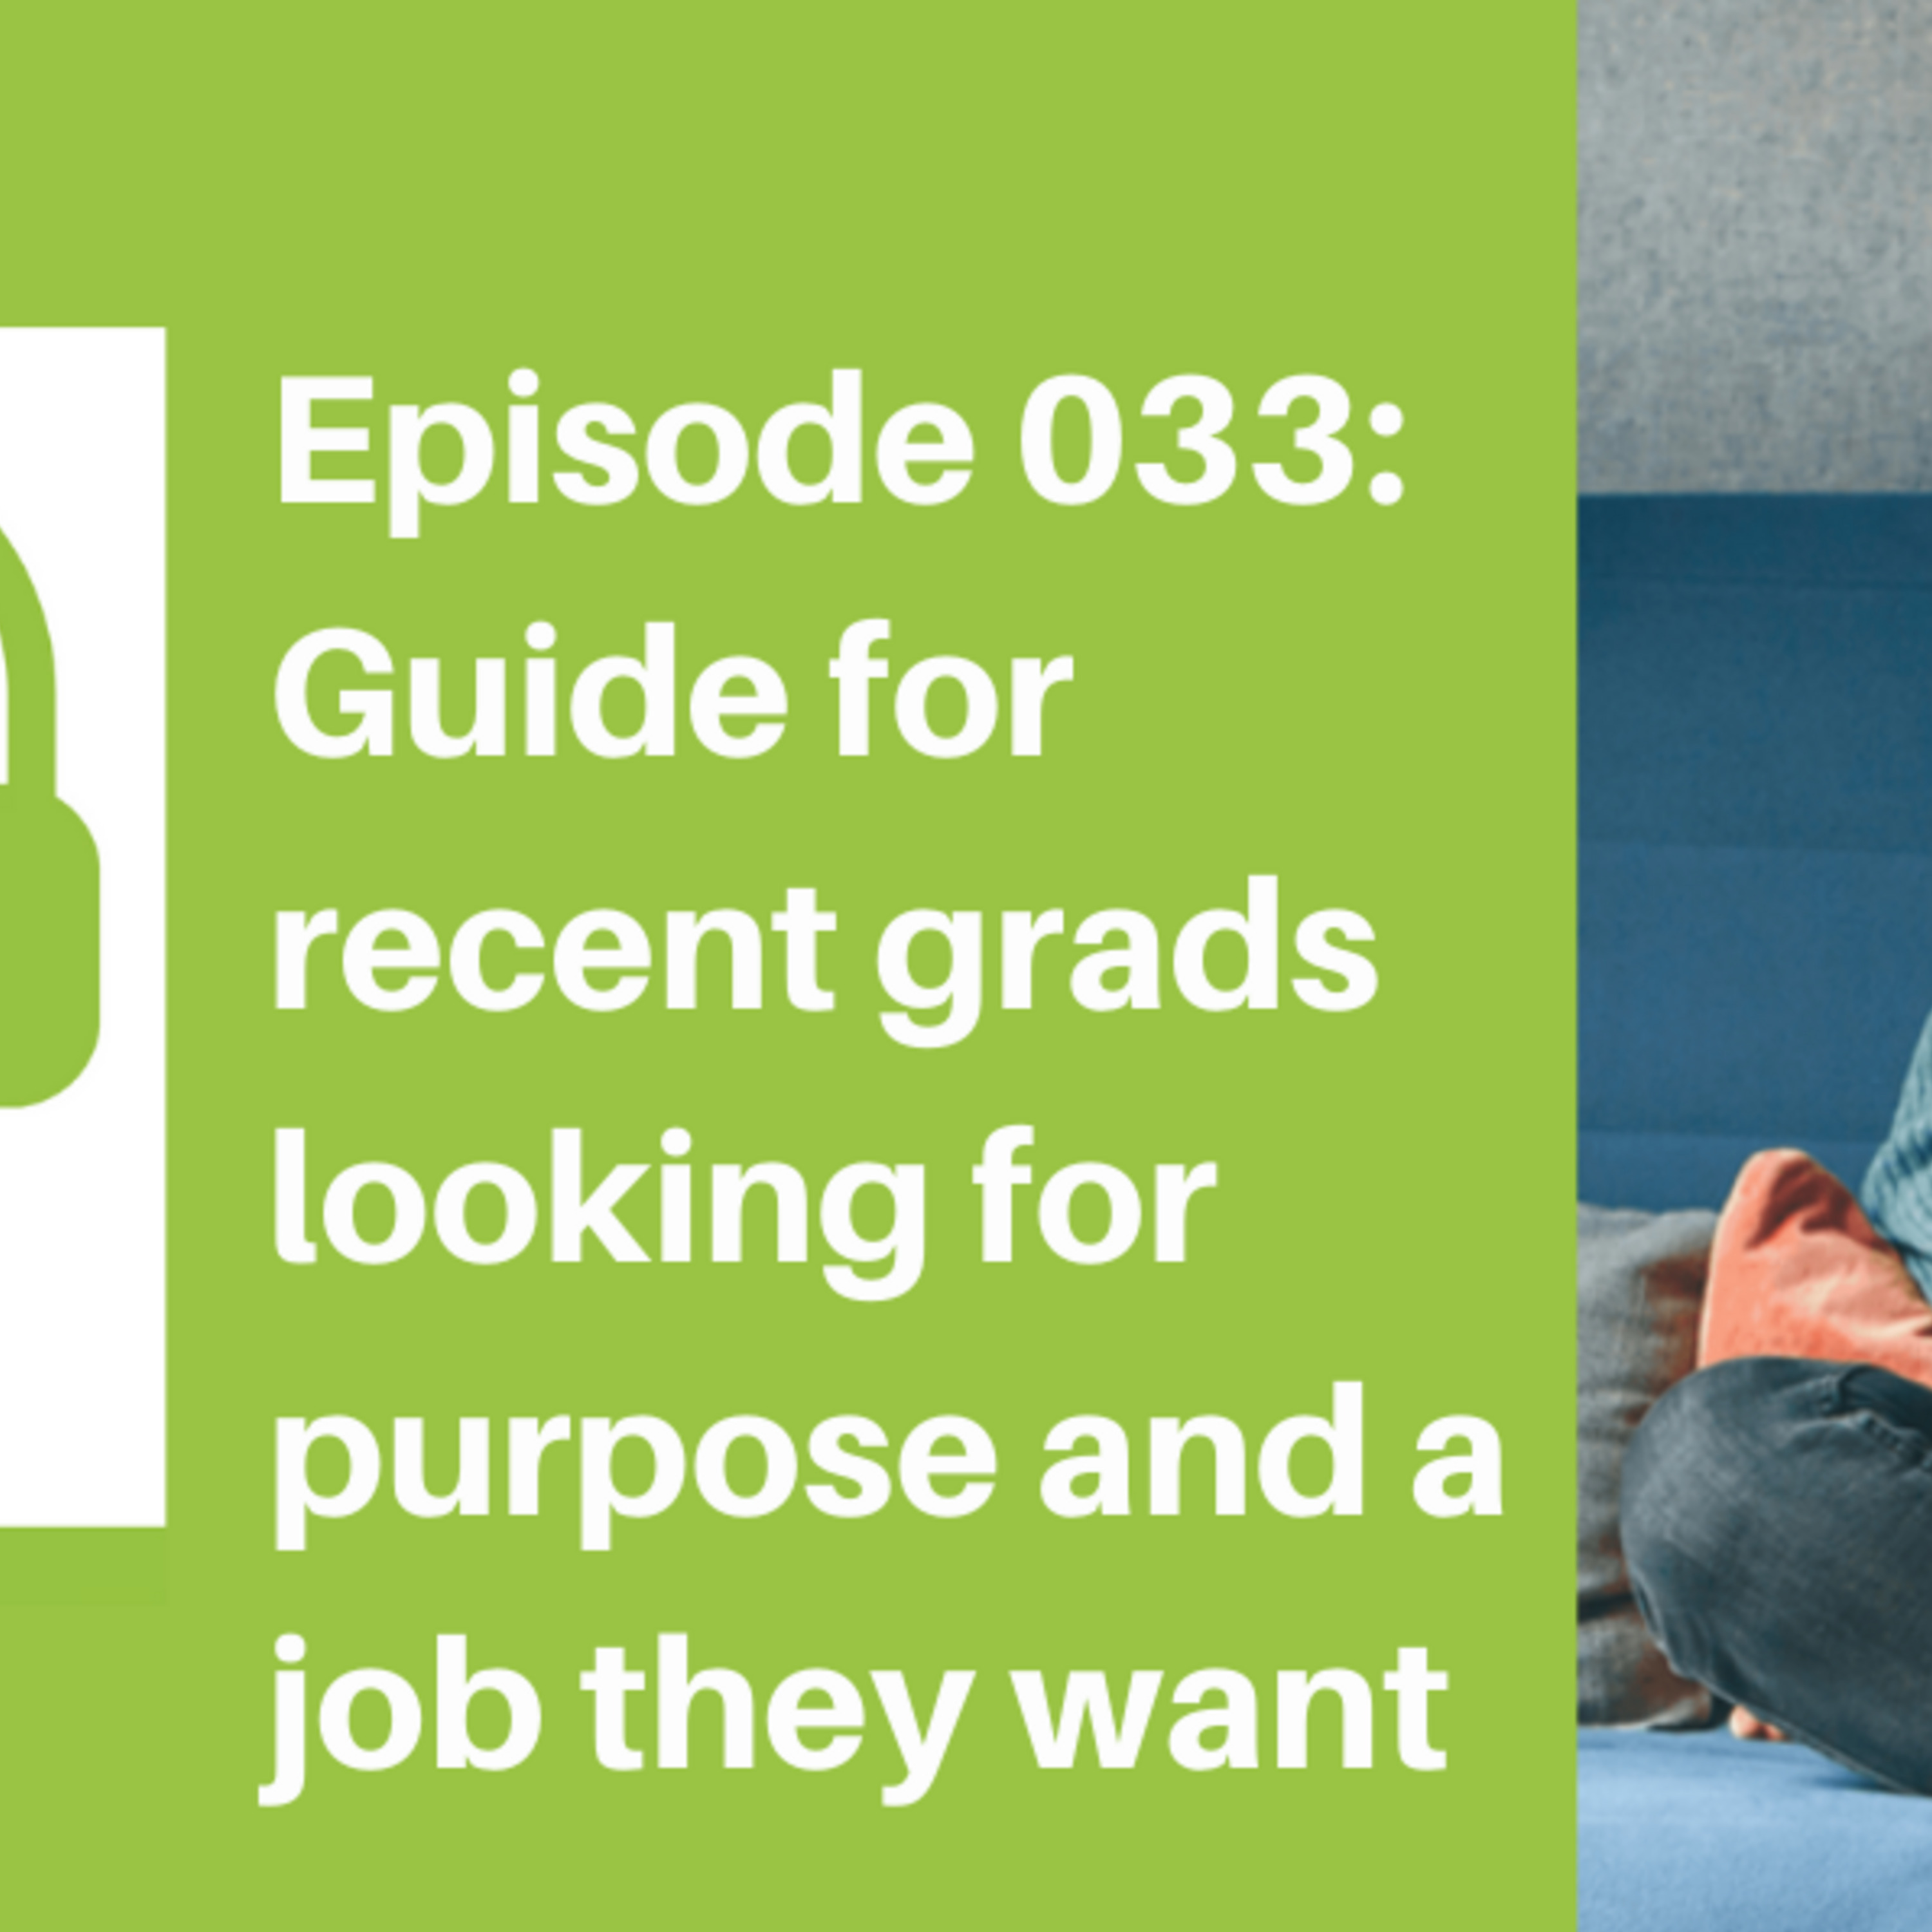 Episode 033: Advice For New Graduates Looking For A Job They Want